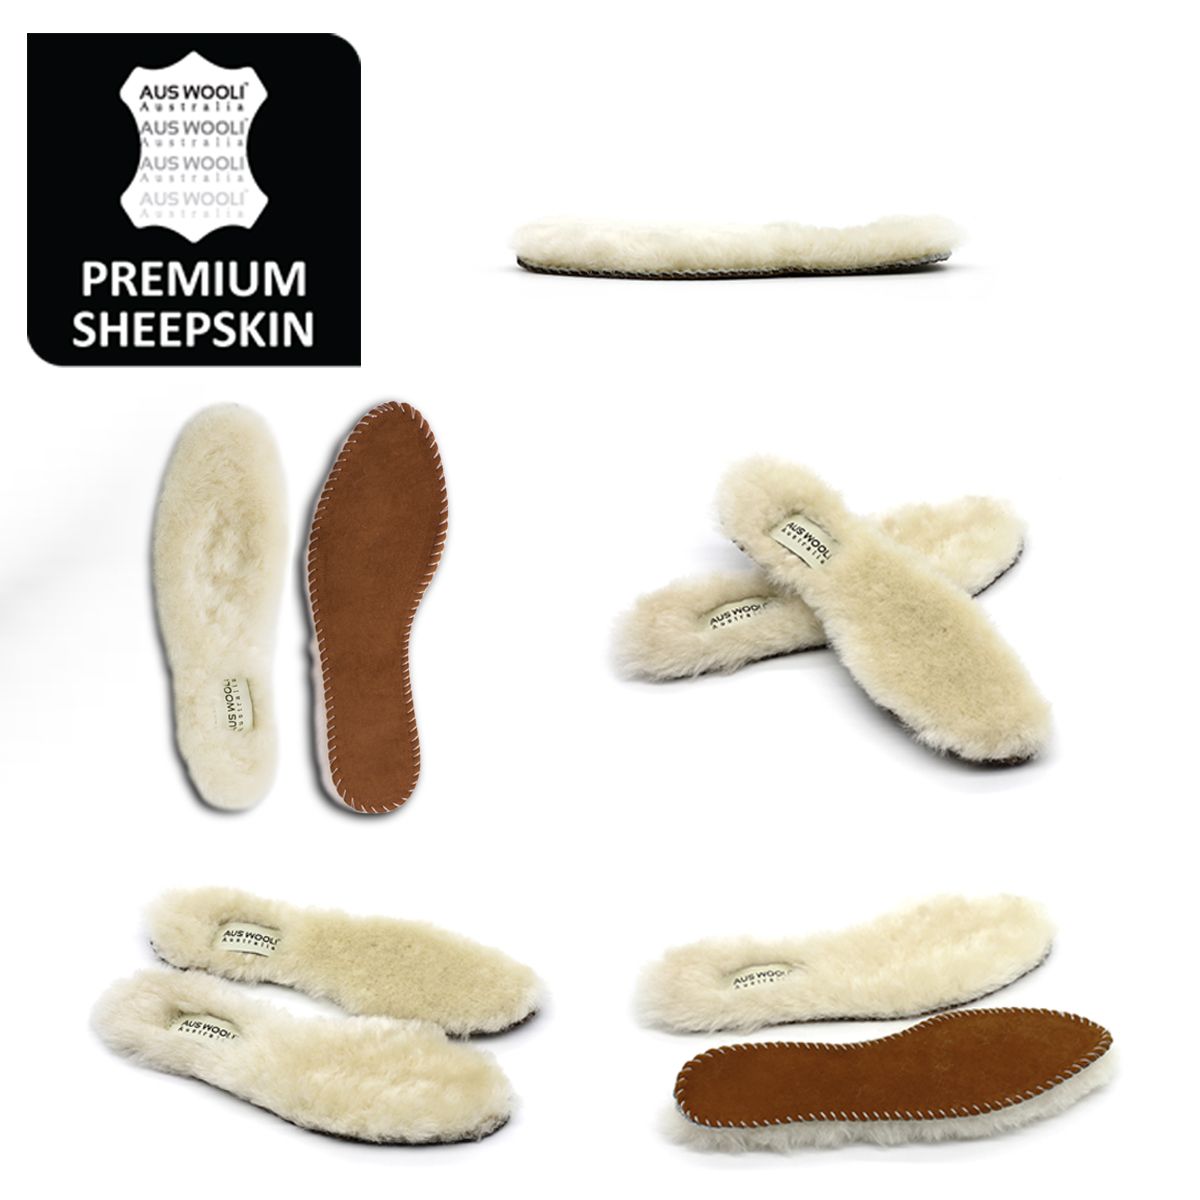 We recommend buying one size up for this style. Durable and long lasting pvc material.  100% waterproof. Elastic gusset for fitting easier, practical styling with some extra fashionable features. FREE Sheepskin insole for extra warmth and comfort.  100% brand new and high quality, comes in a branded box, suitable for gift.